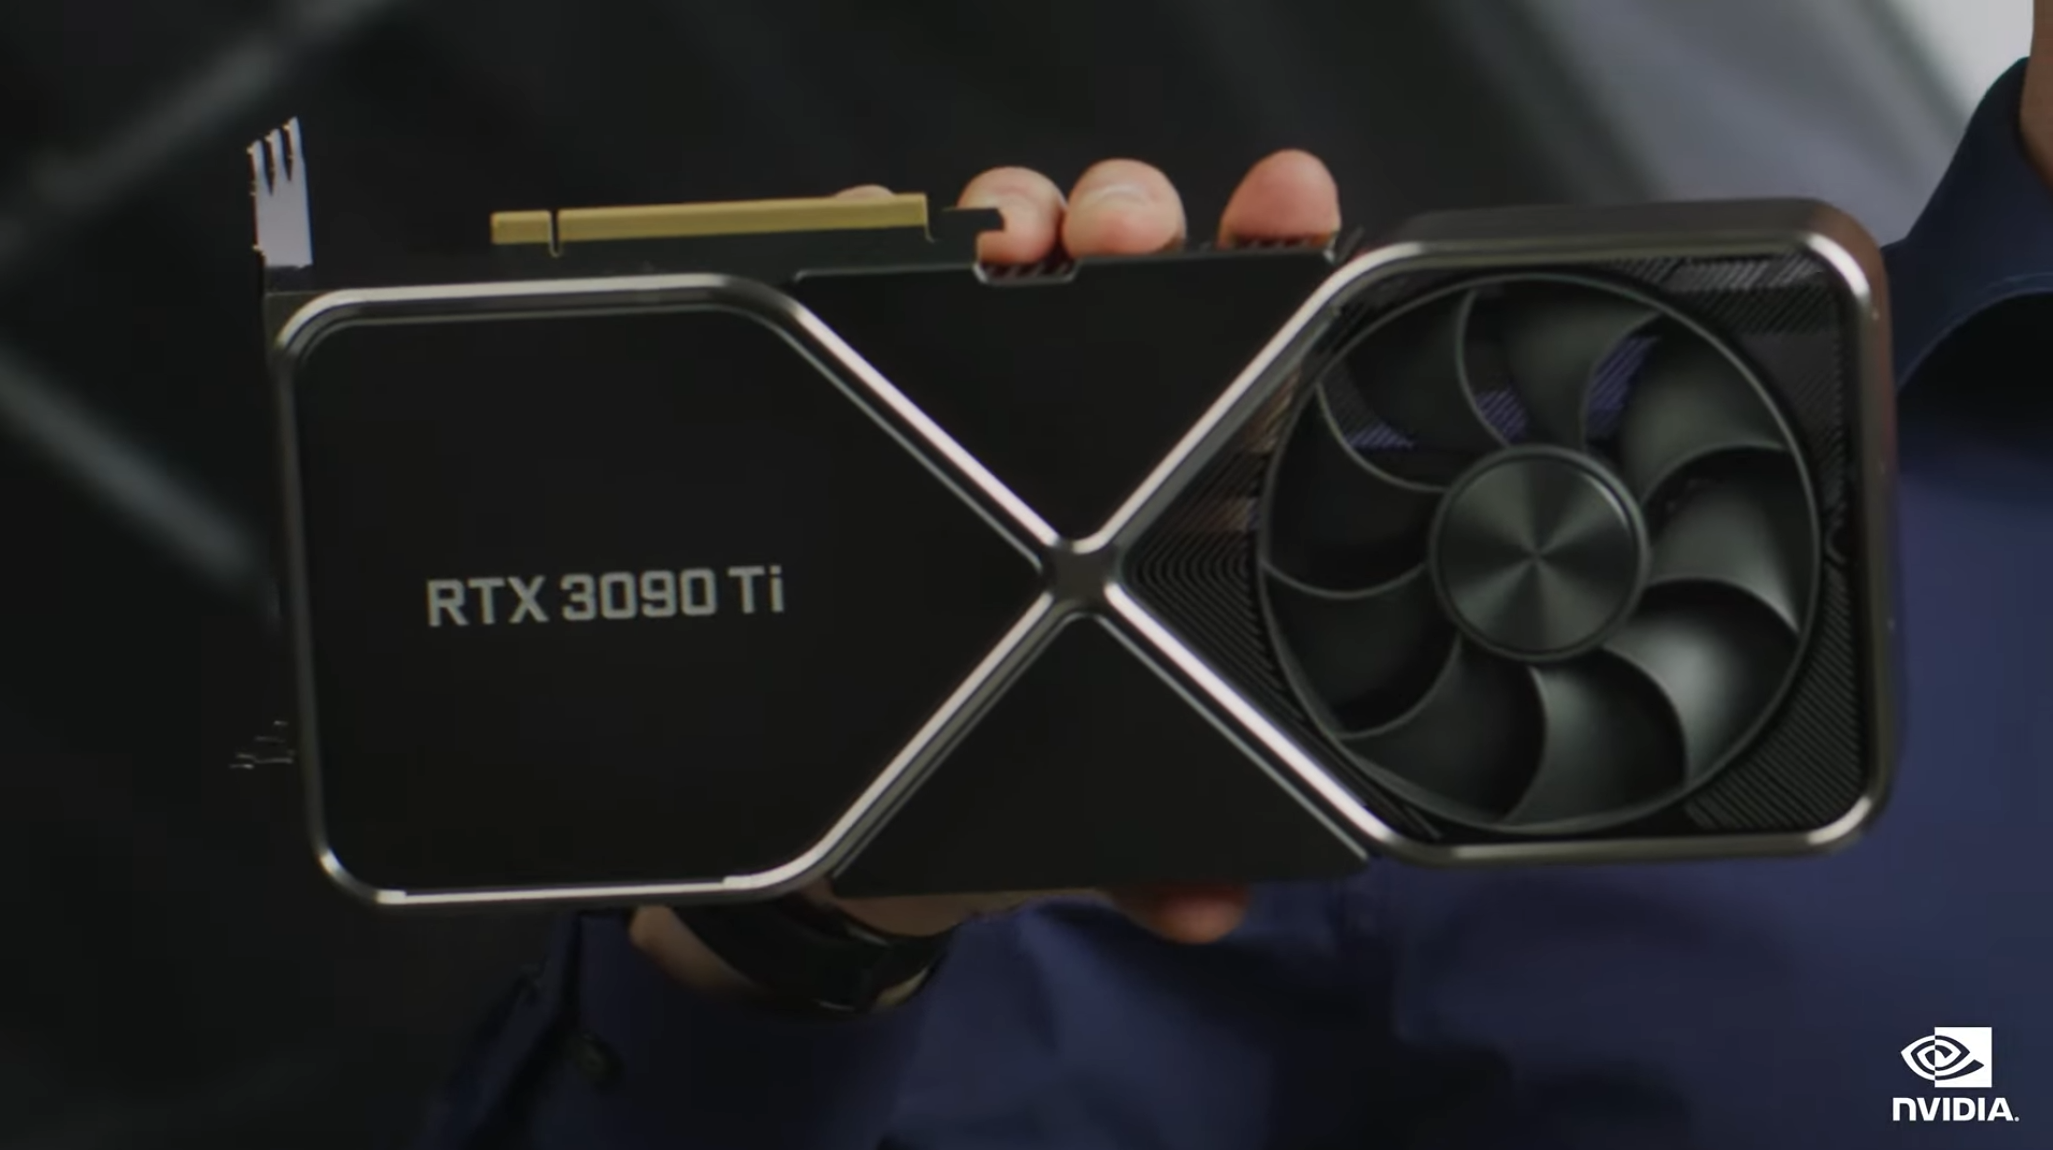 The Nvidia GeForce RTX 3090 Ti being held in a hand.